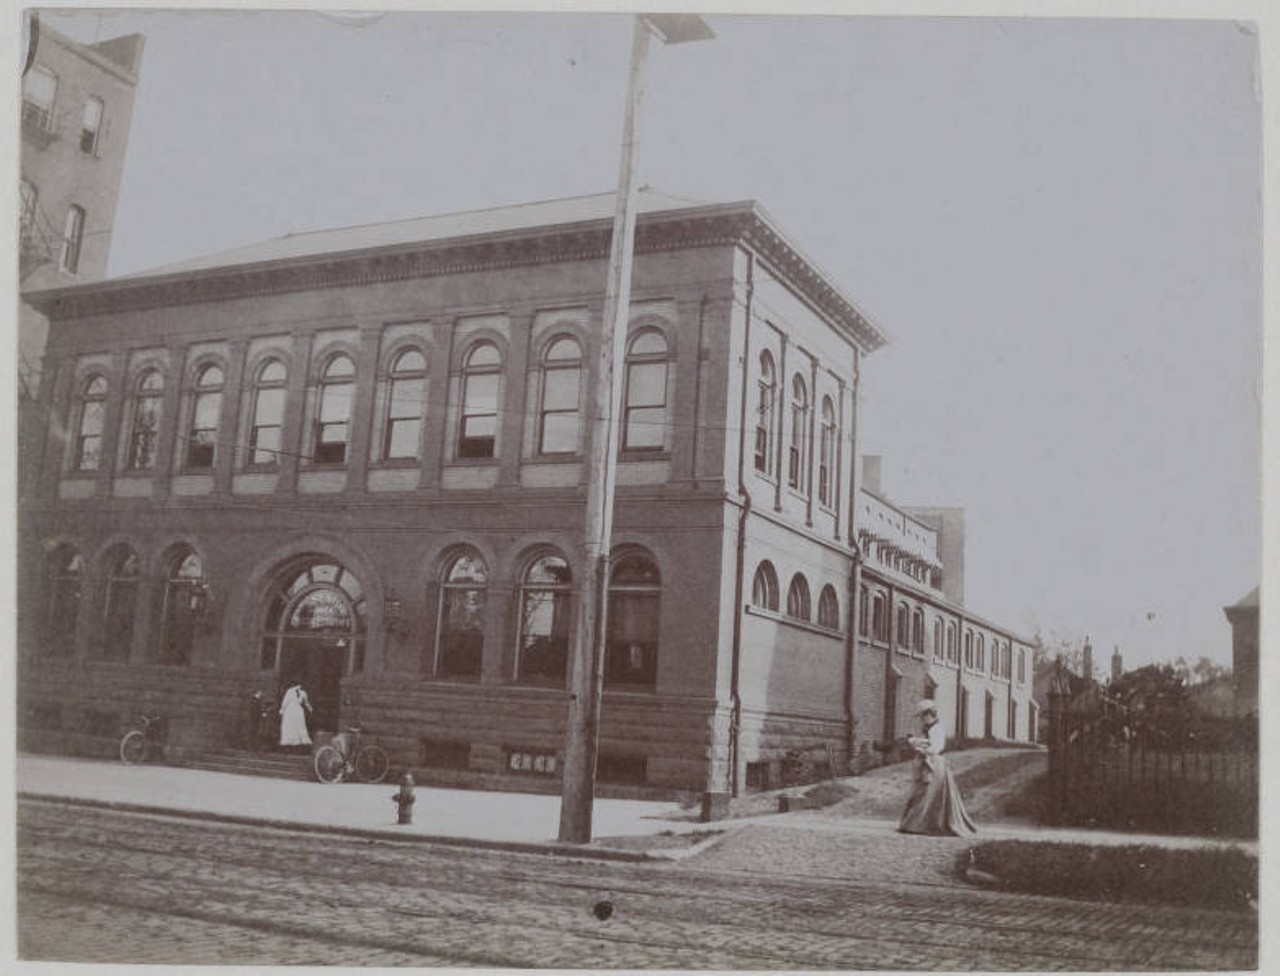 West Side Chamber of Commerce, 1901